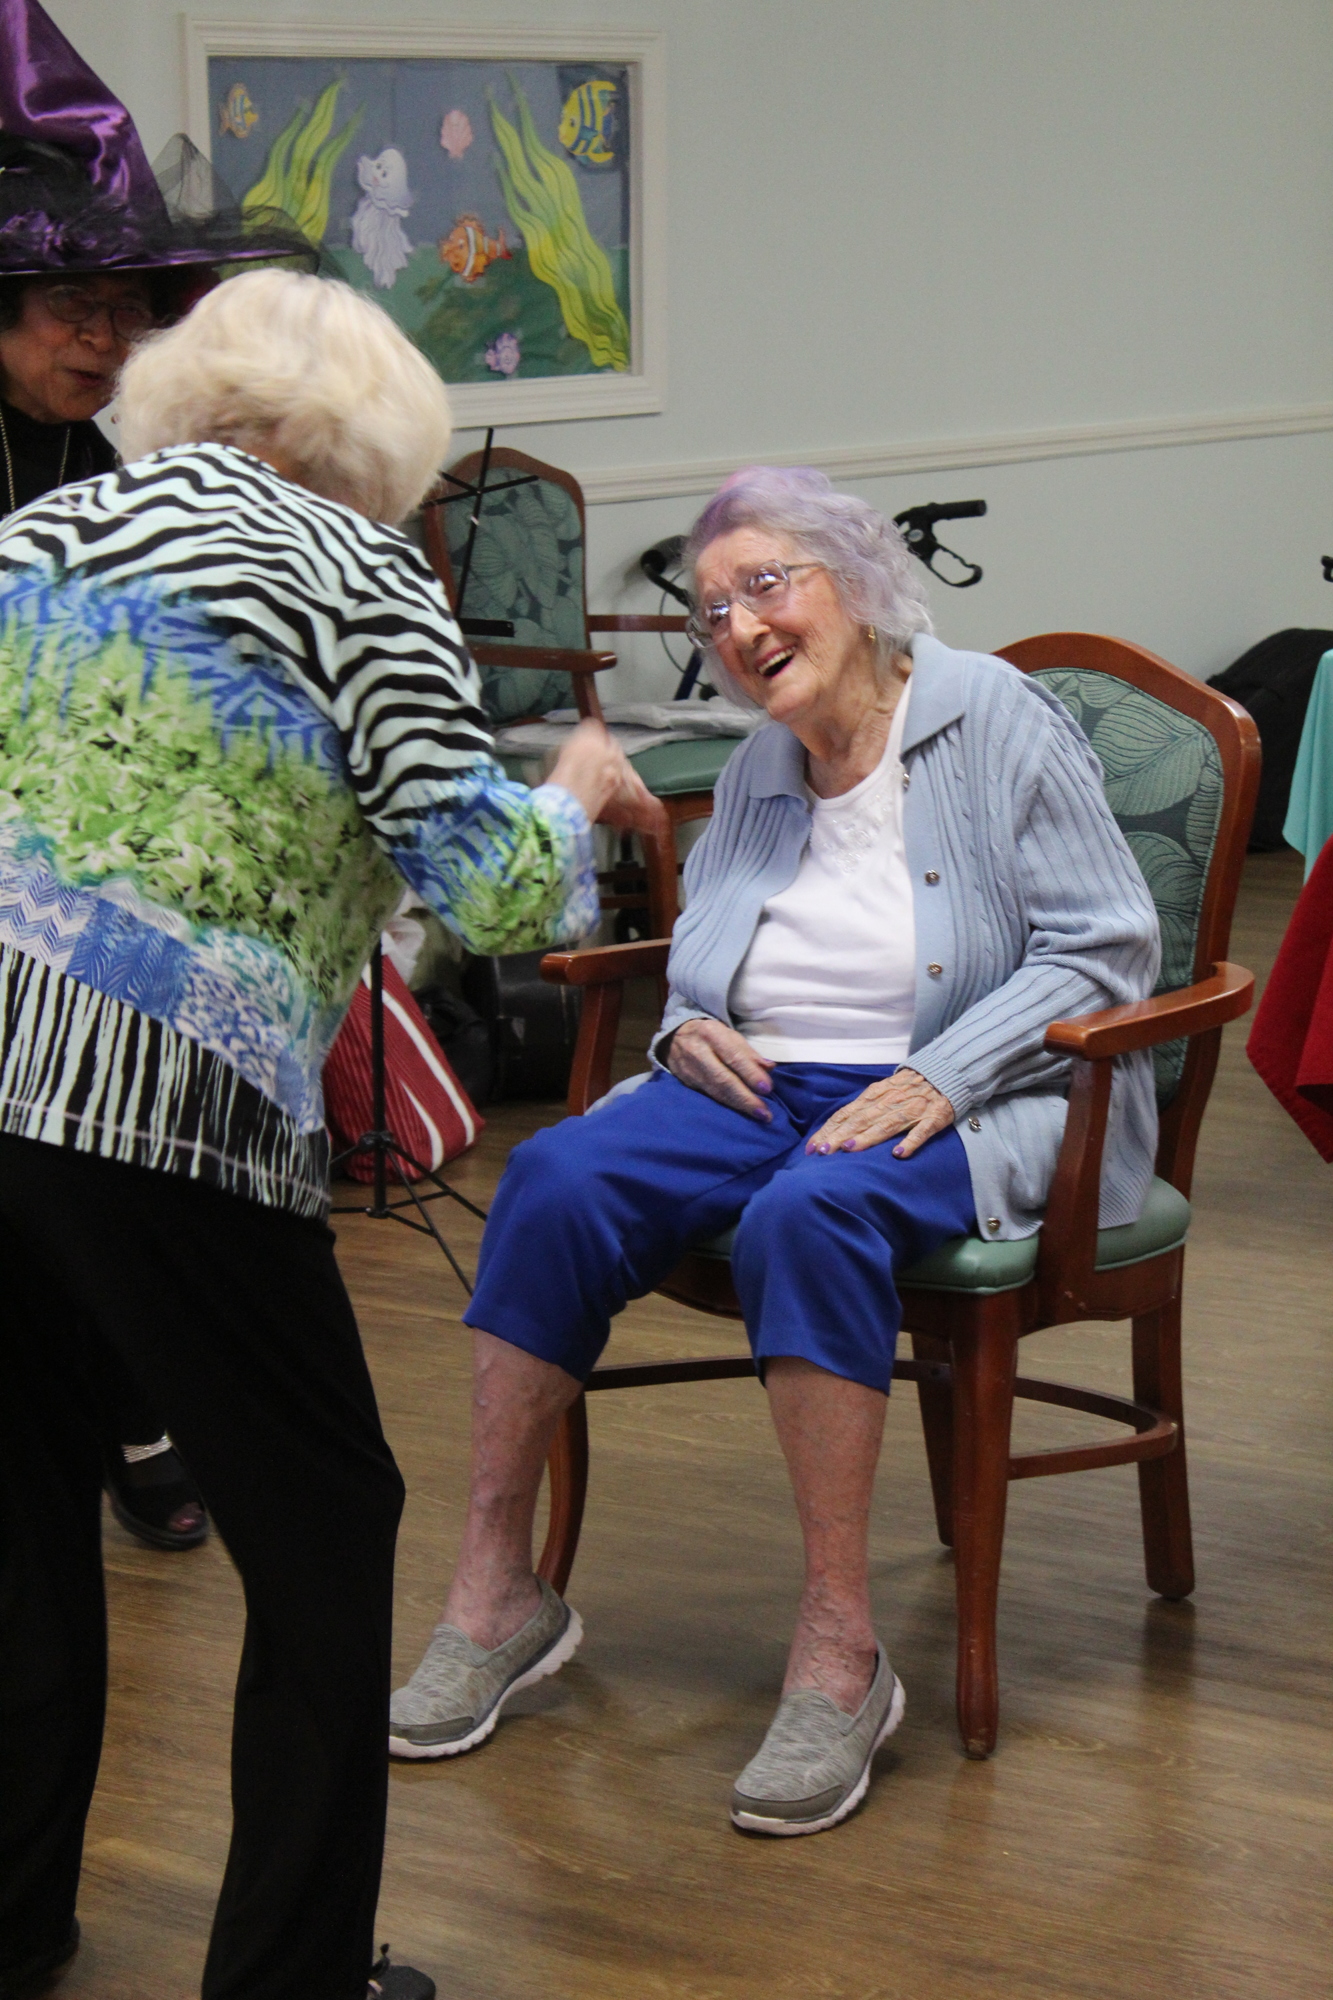 Erma Mohl dances with a longtime friend at her 103rd birthday party on Monday, Oct. 30. Photo by Jarleene Almenas